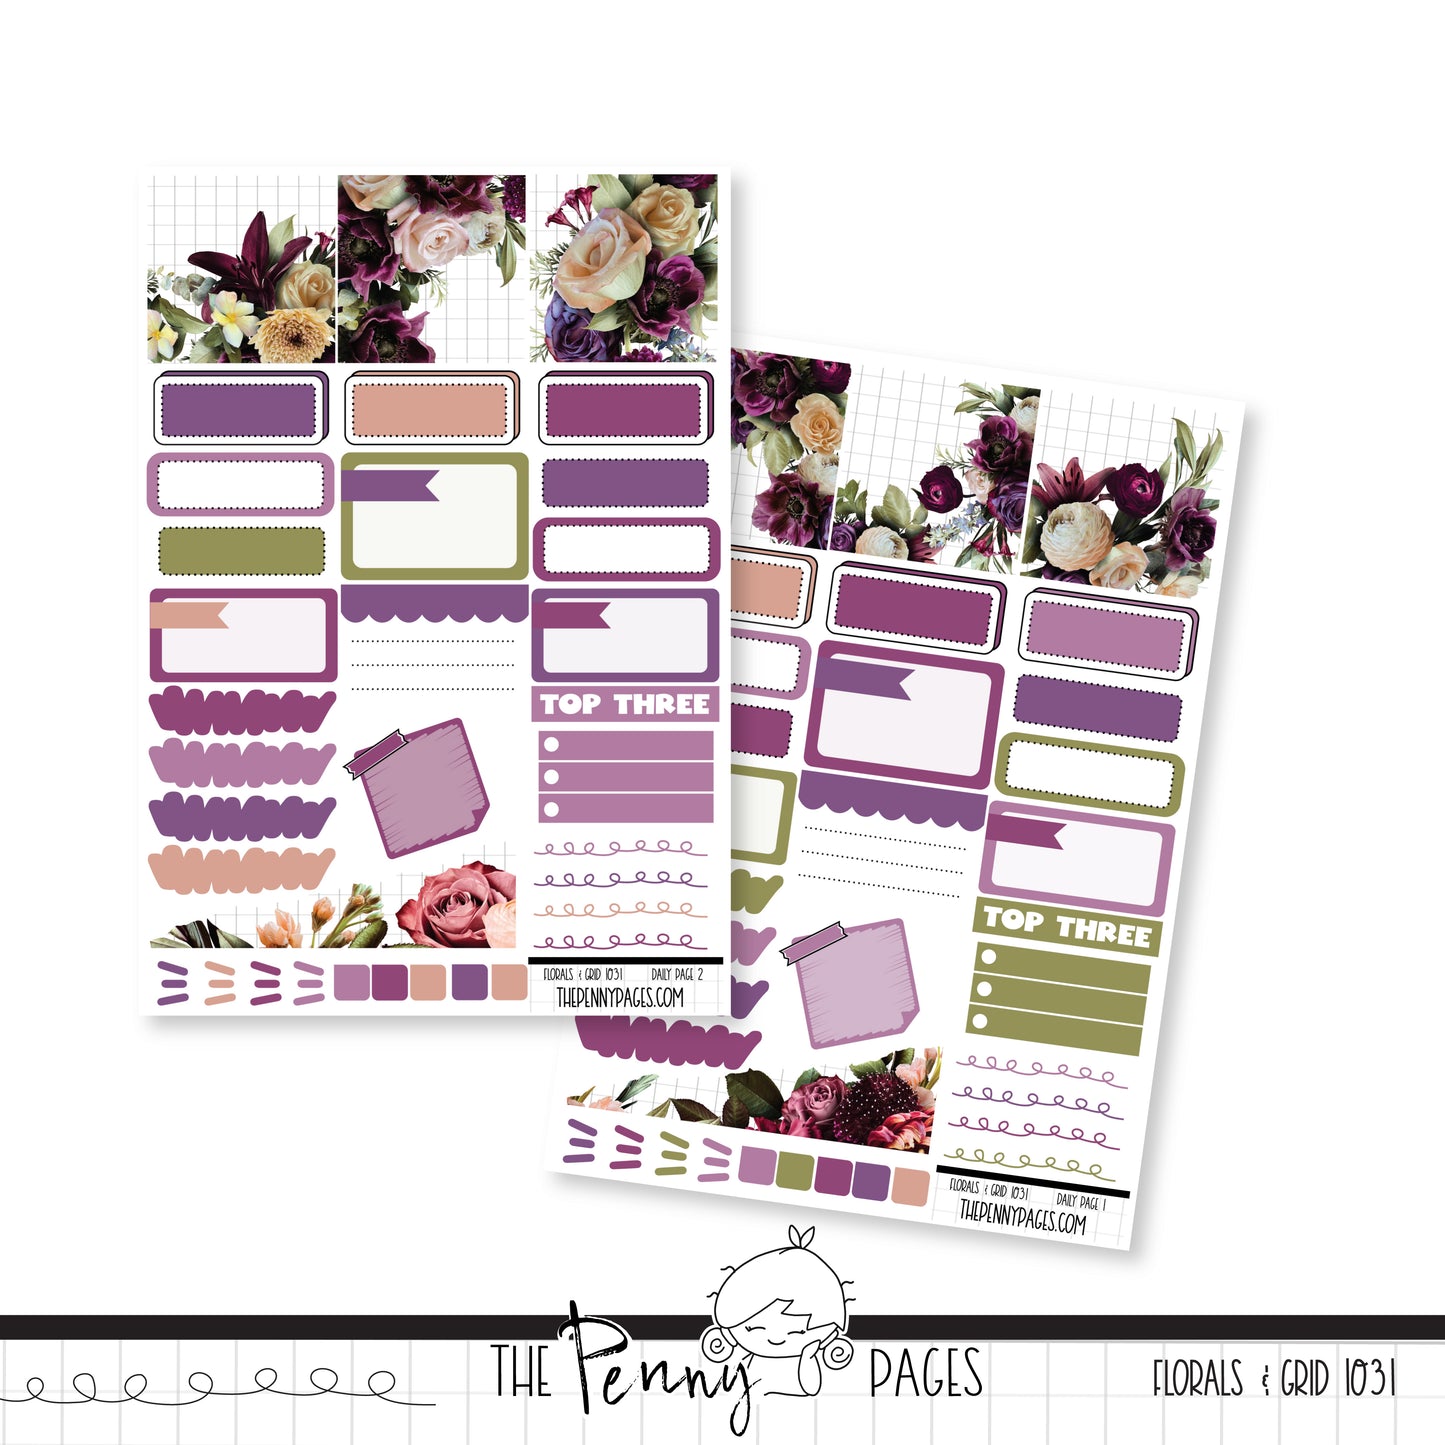 #1031 Florals & Grid  - Daily Pages